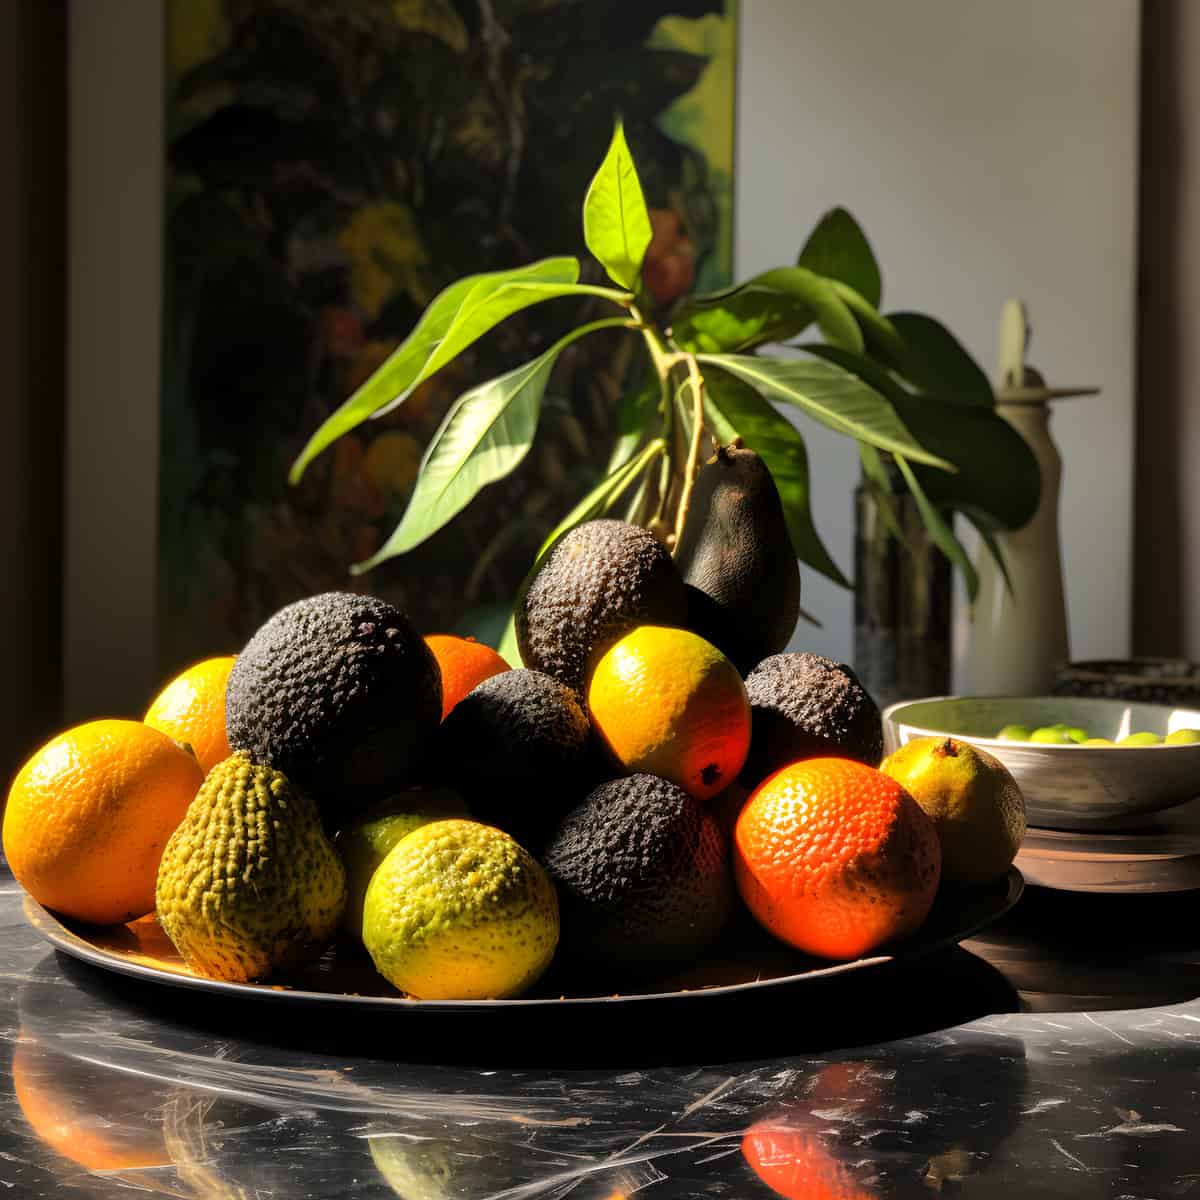 Terap Hitam Fruit on a kitchen counter